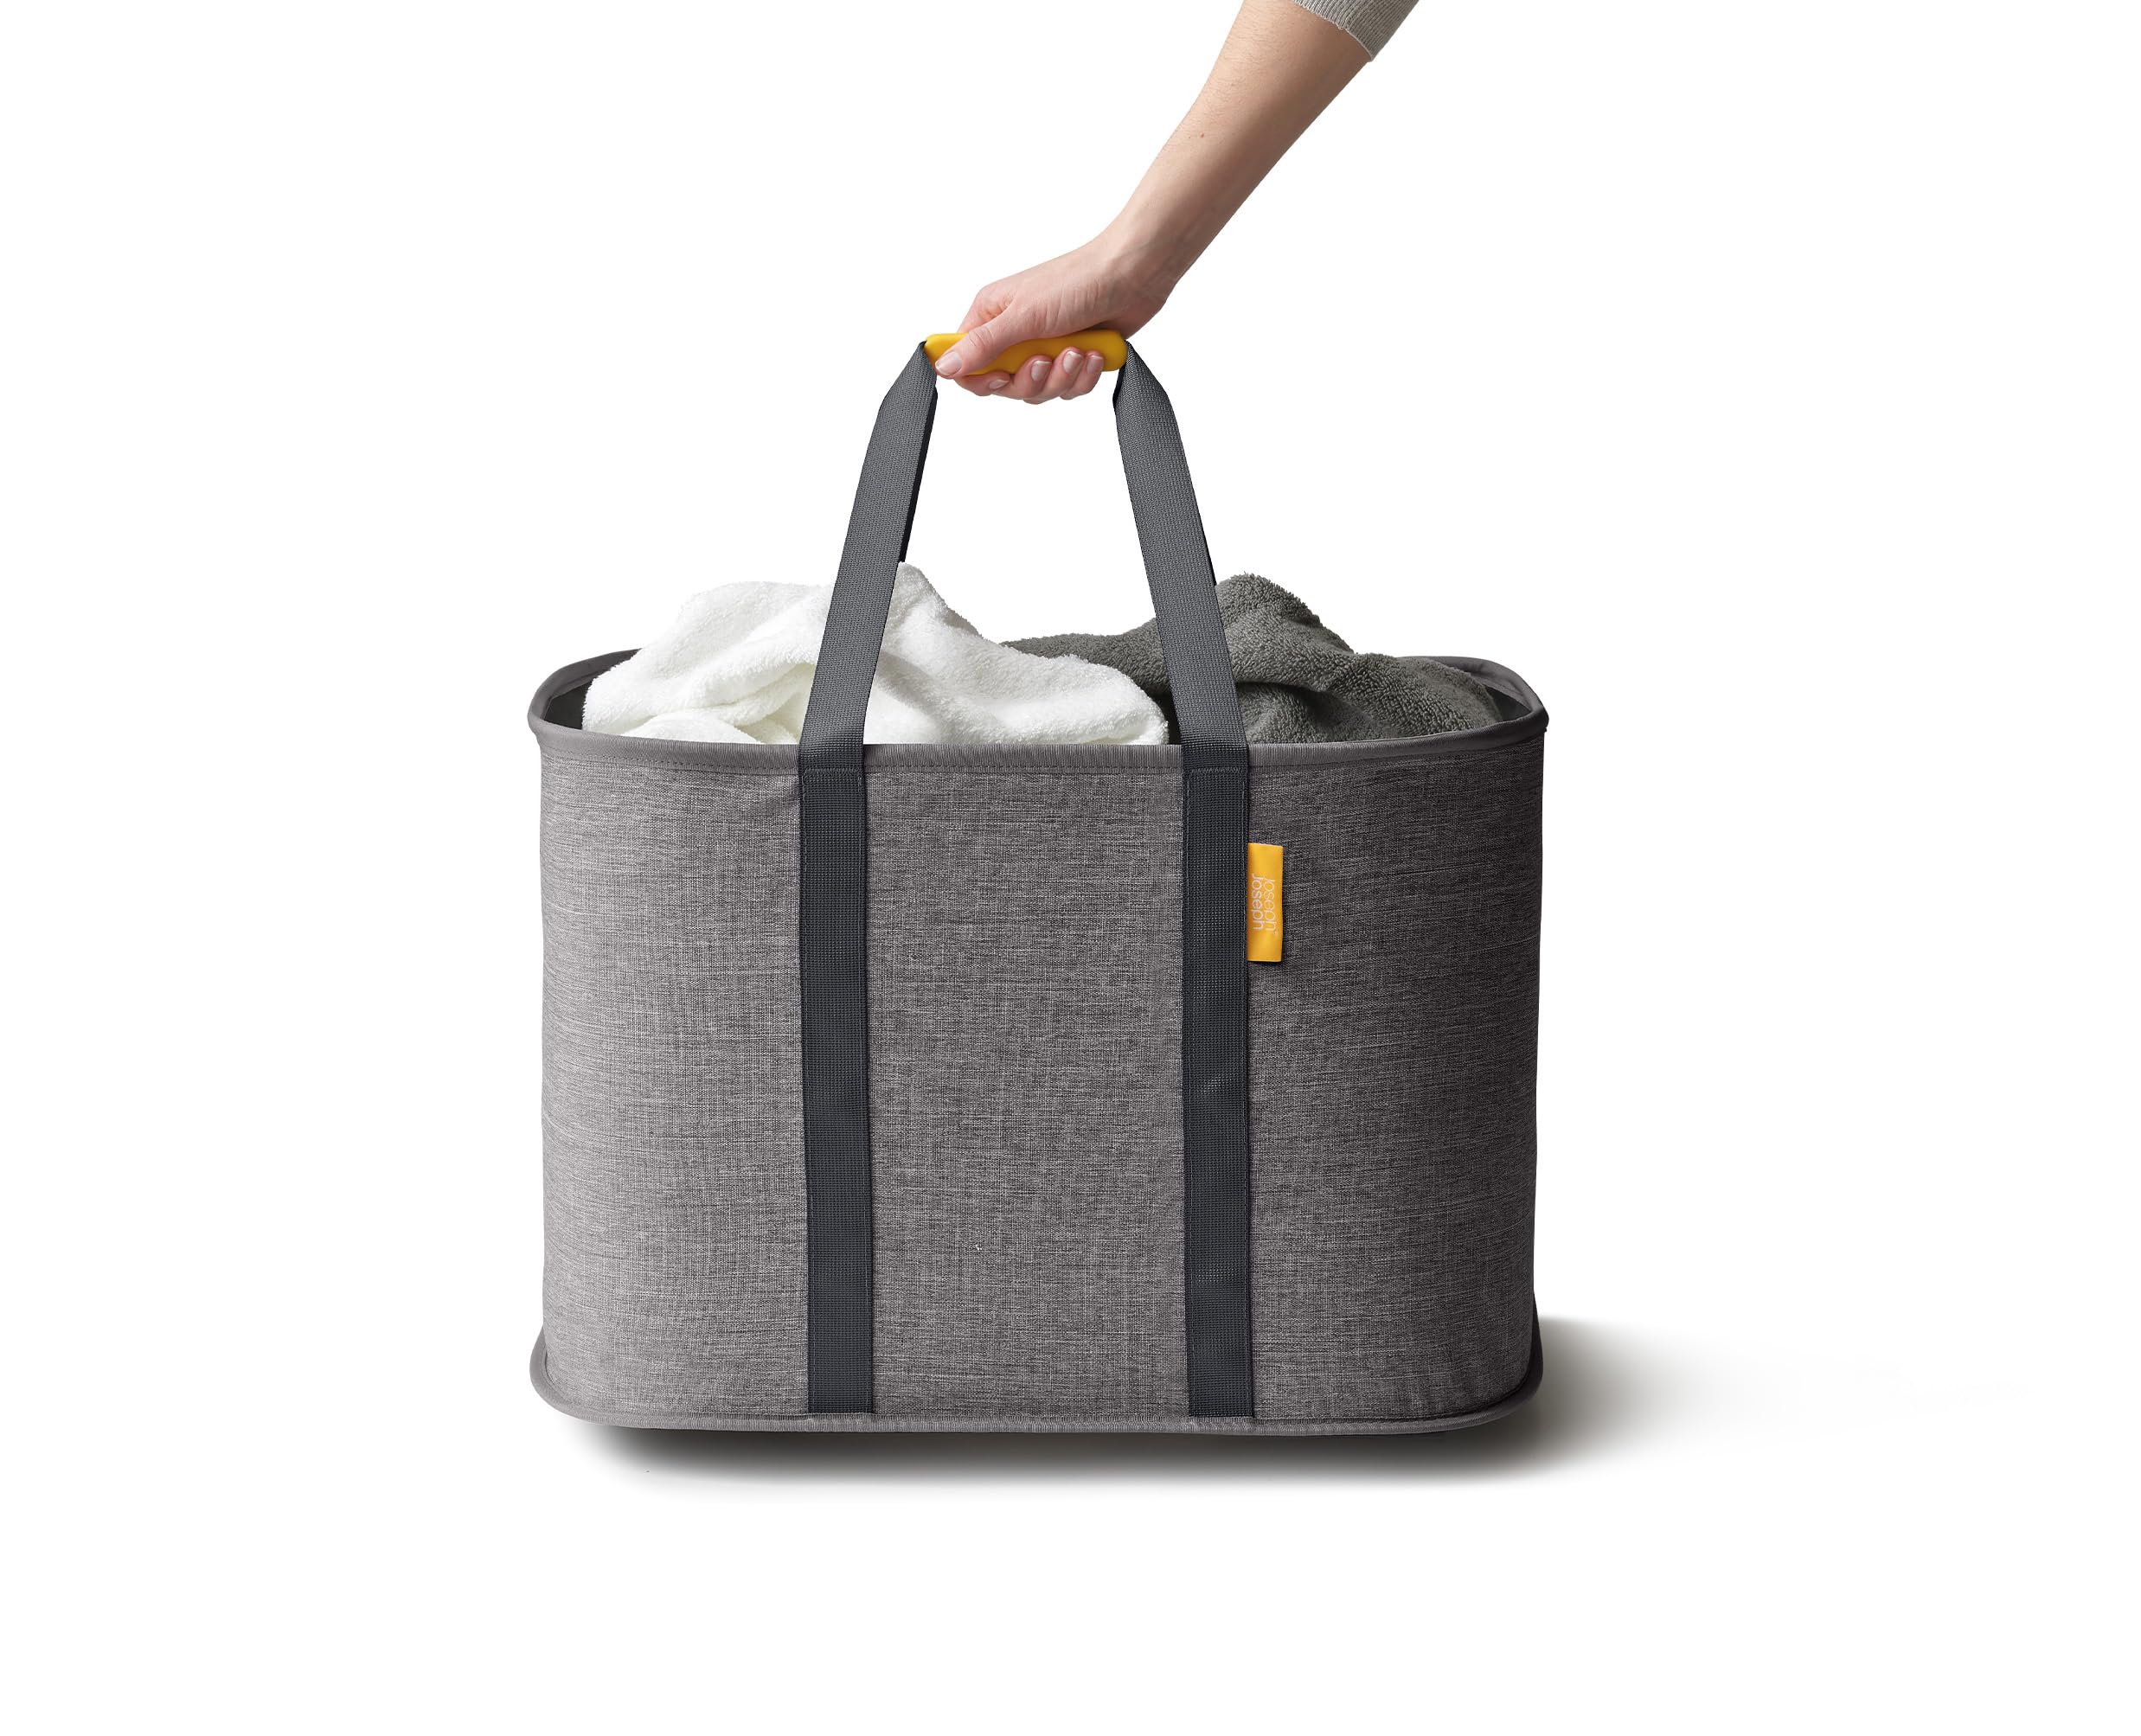 Joseph Joseph Hold-All Max Collapsible 55L Washing Laundry Basket Bag, Durable Fabric, Moisture Resistant, Grey